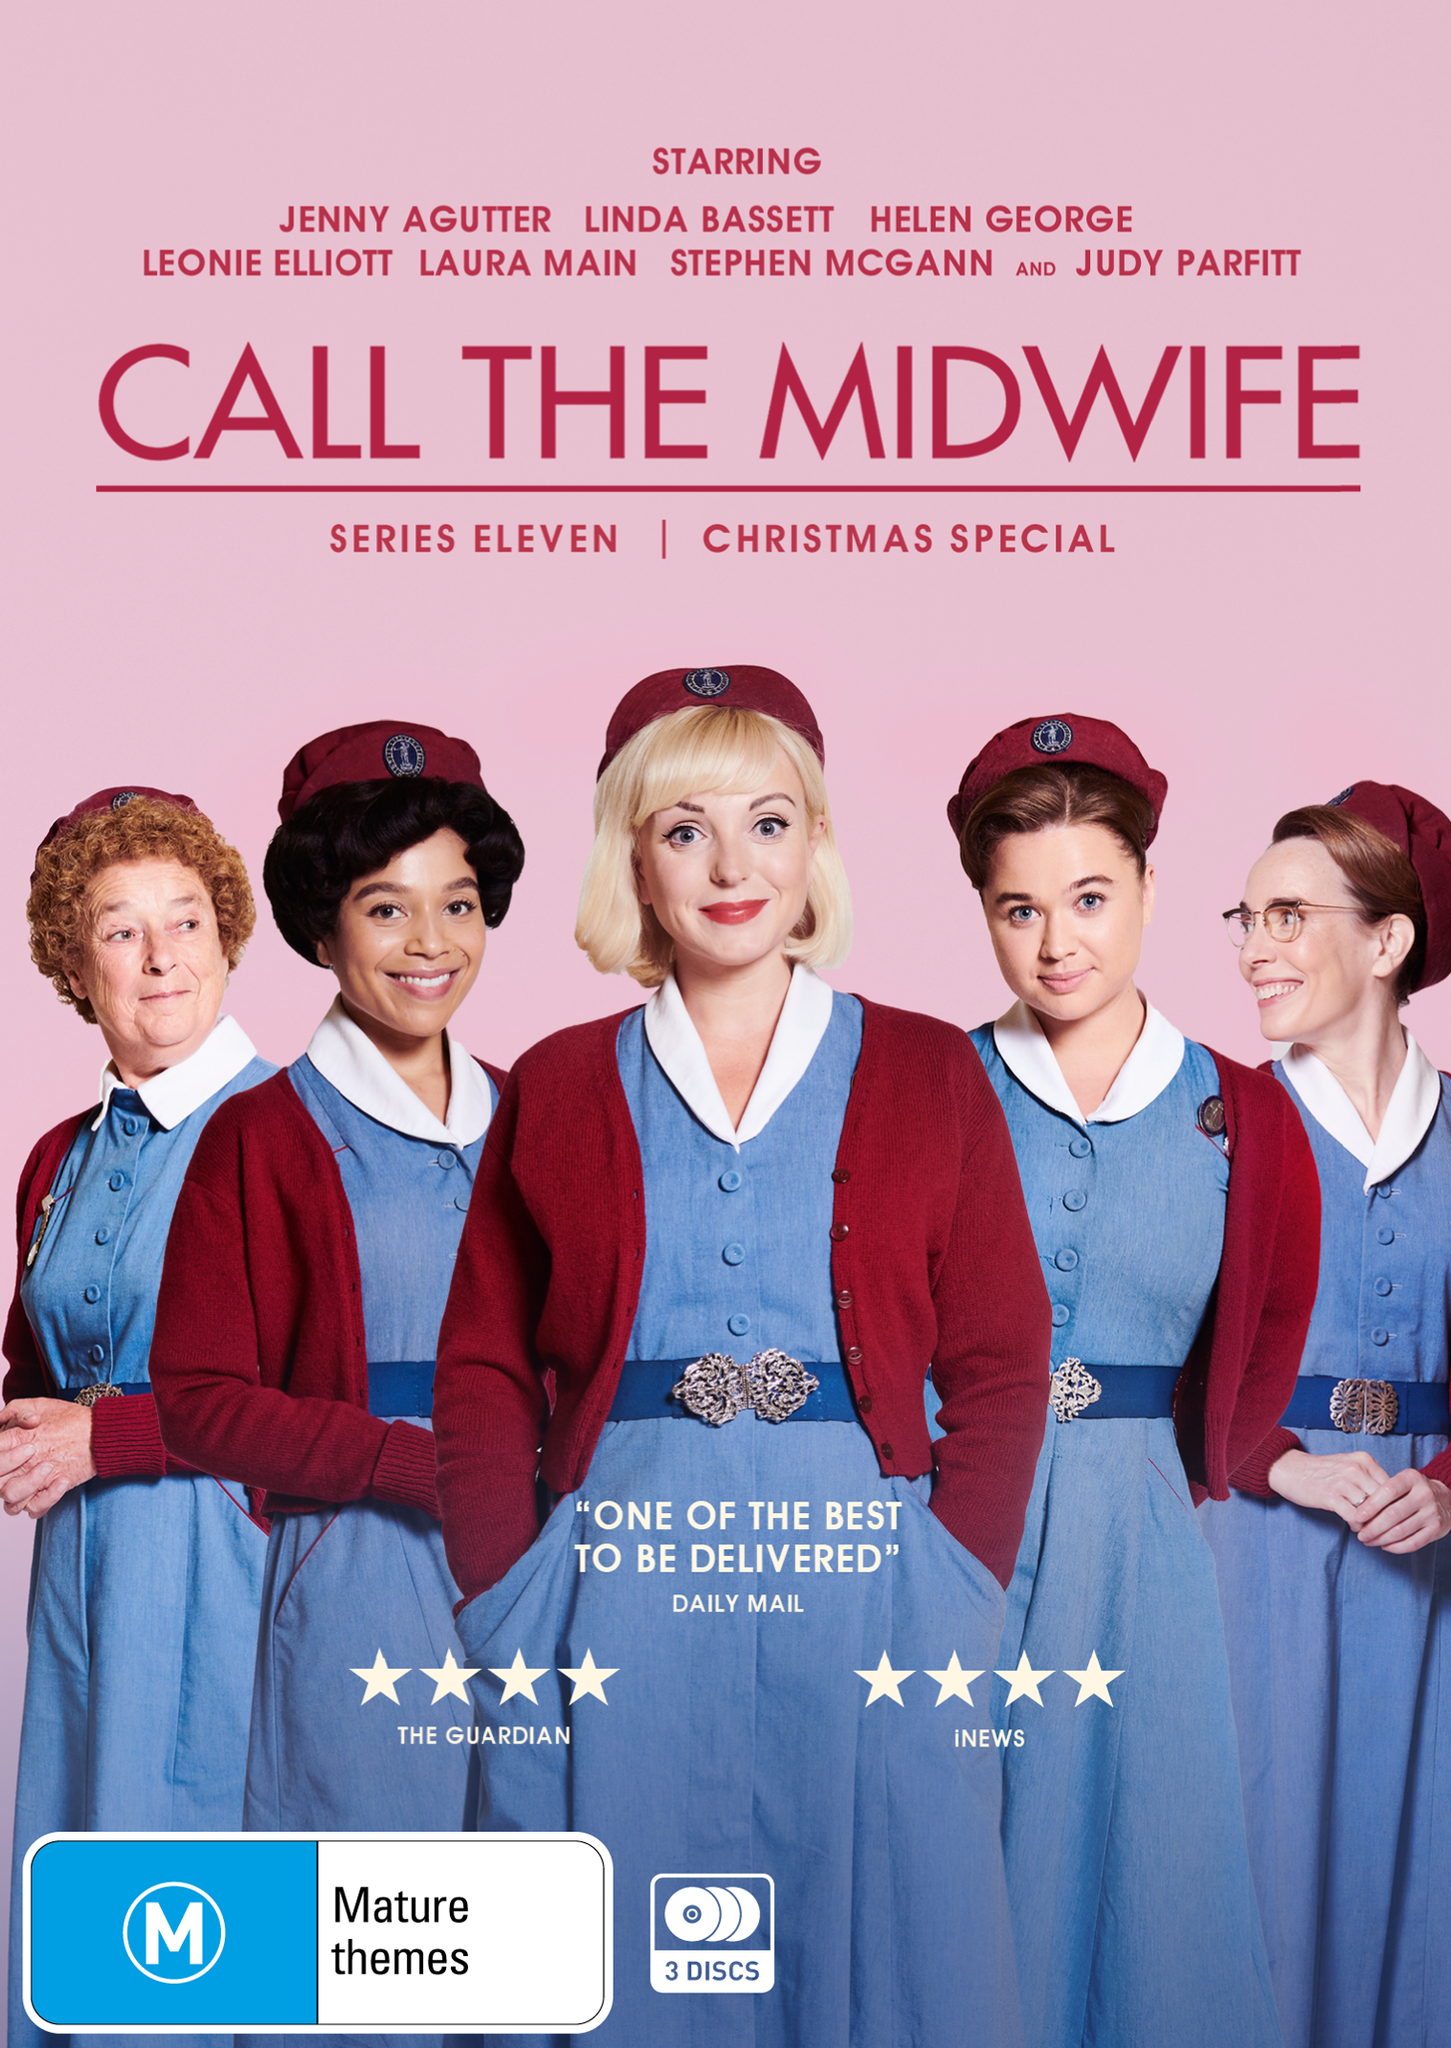 CALL THE MIDWIFE: SERIES 11